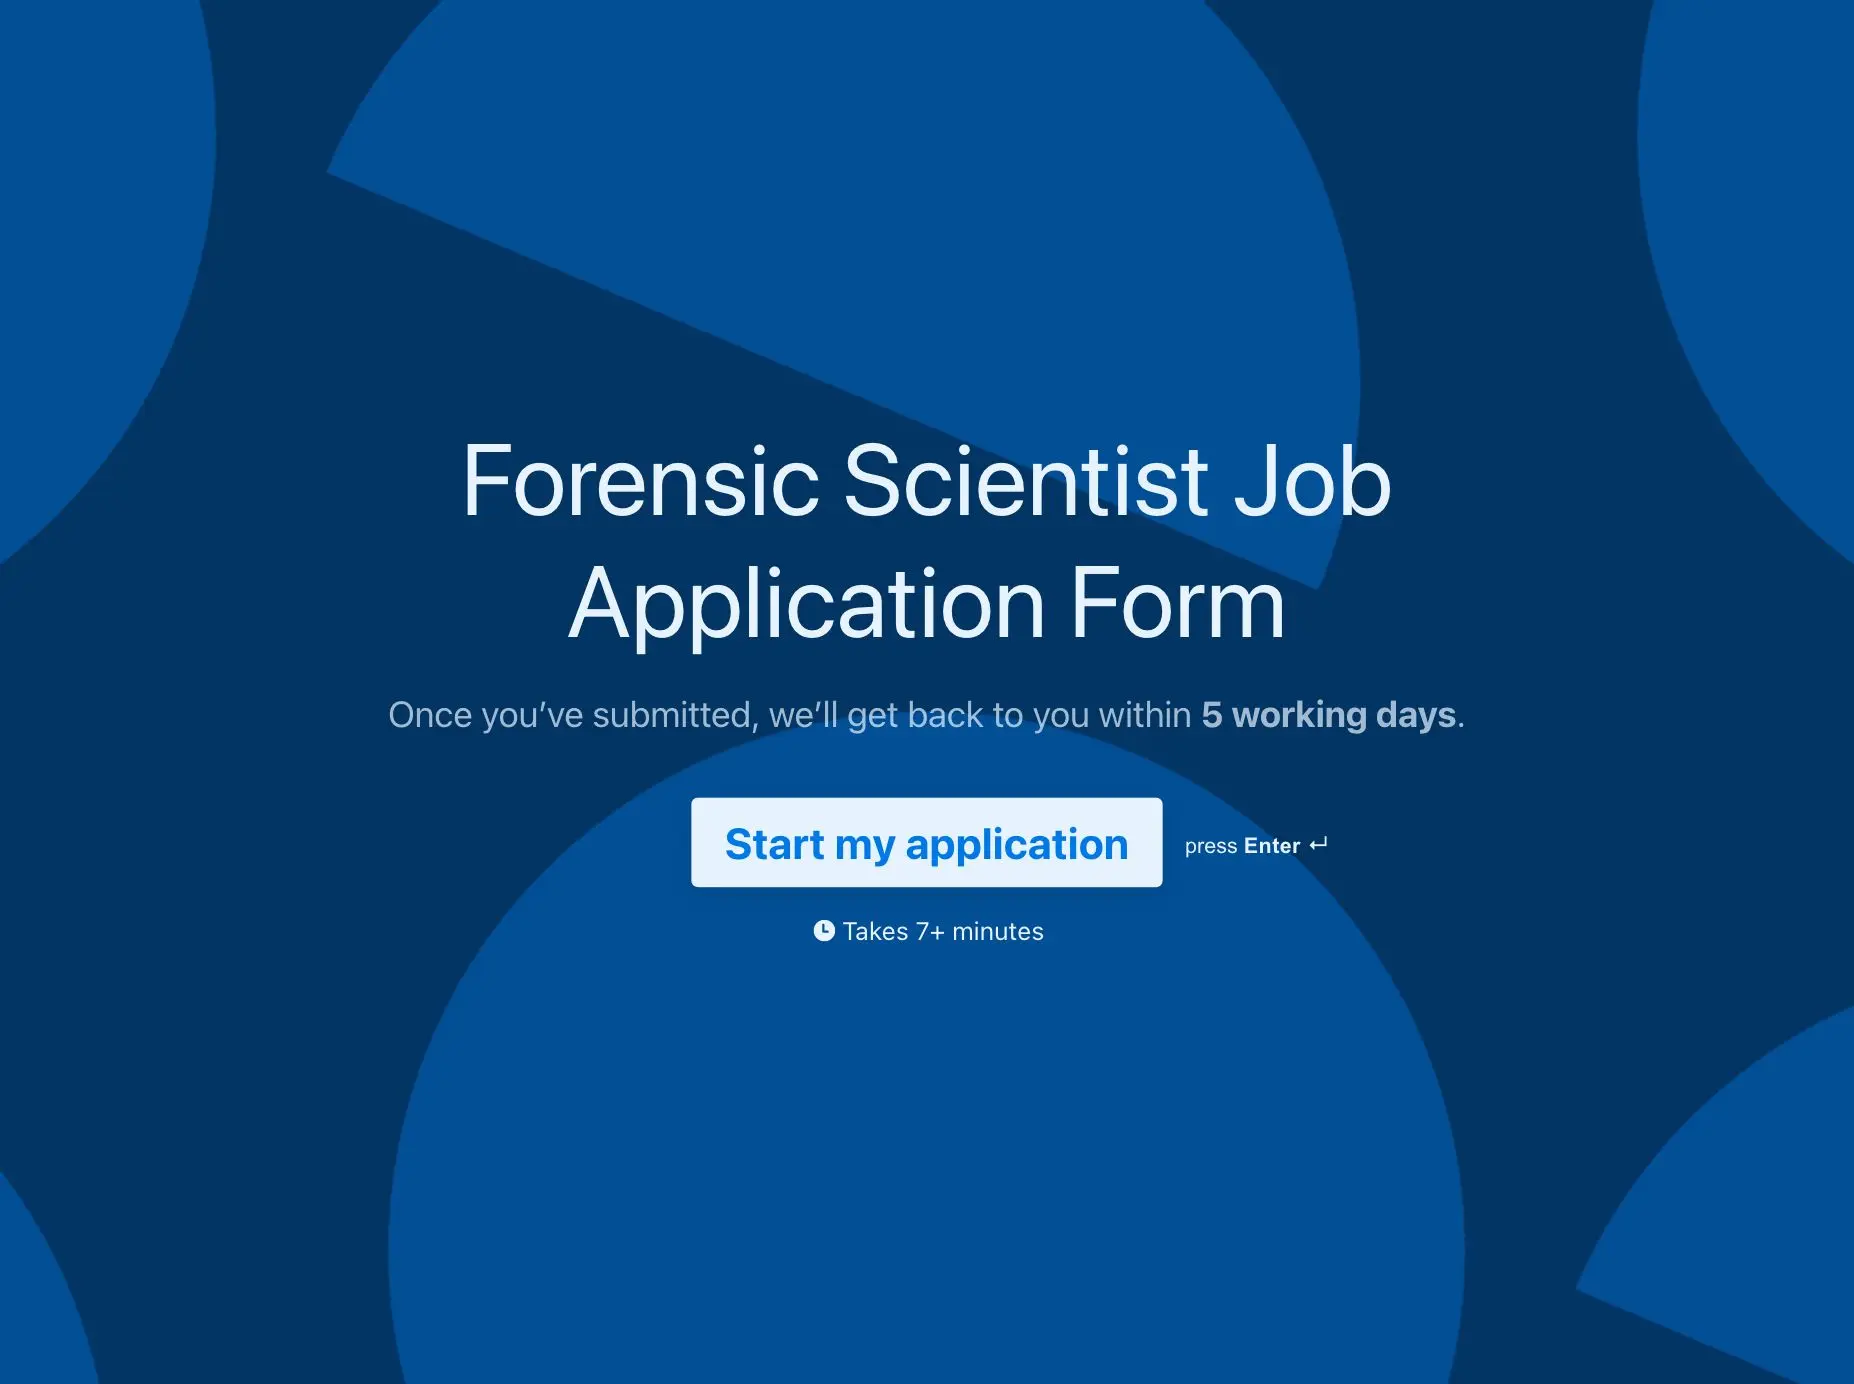 Forensic Scientist Job Application Form Template Hero